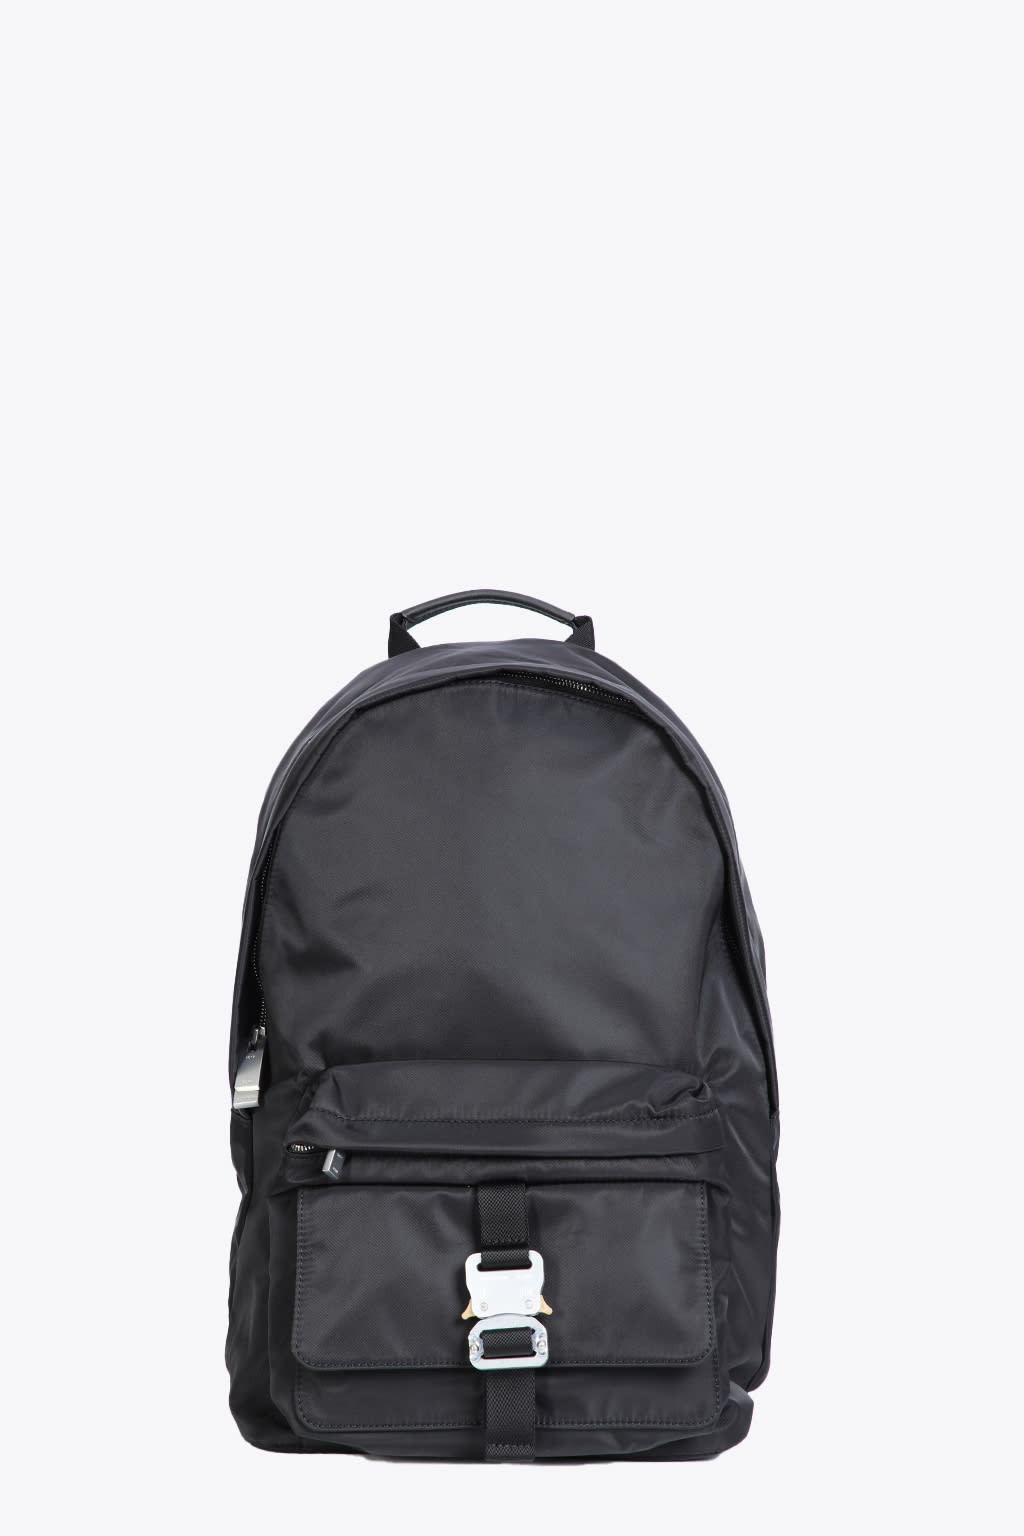 Alyx Backpack - X Black Nylon Backpack With Rollercoaster Buckle. In Nero/argento